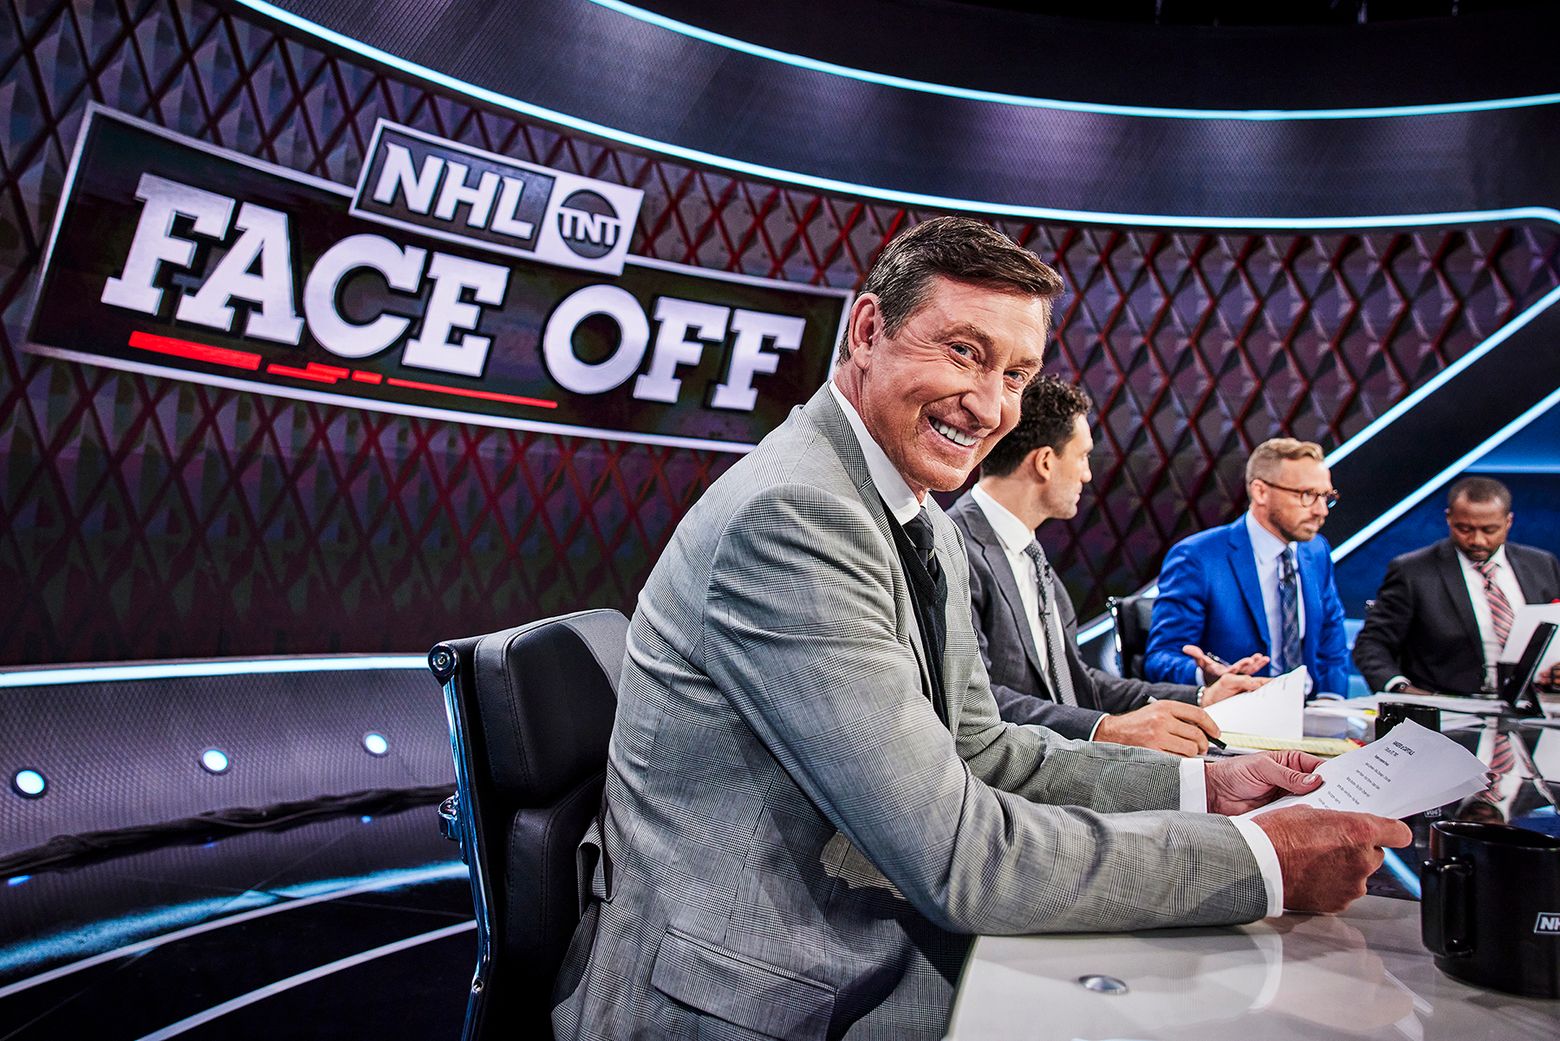 Turner Sports Announces Commentators for 2022 Stanley Cup Playoffs  Presented by GEICO, Tampa Bay Lightning-Toronto Maple Leafs, Game 7 on TNT  — Saturday, May 14